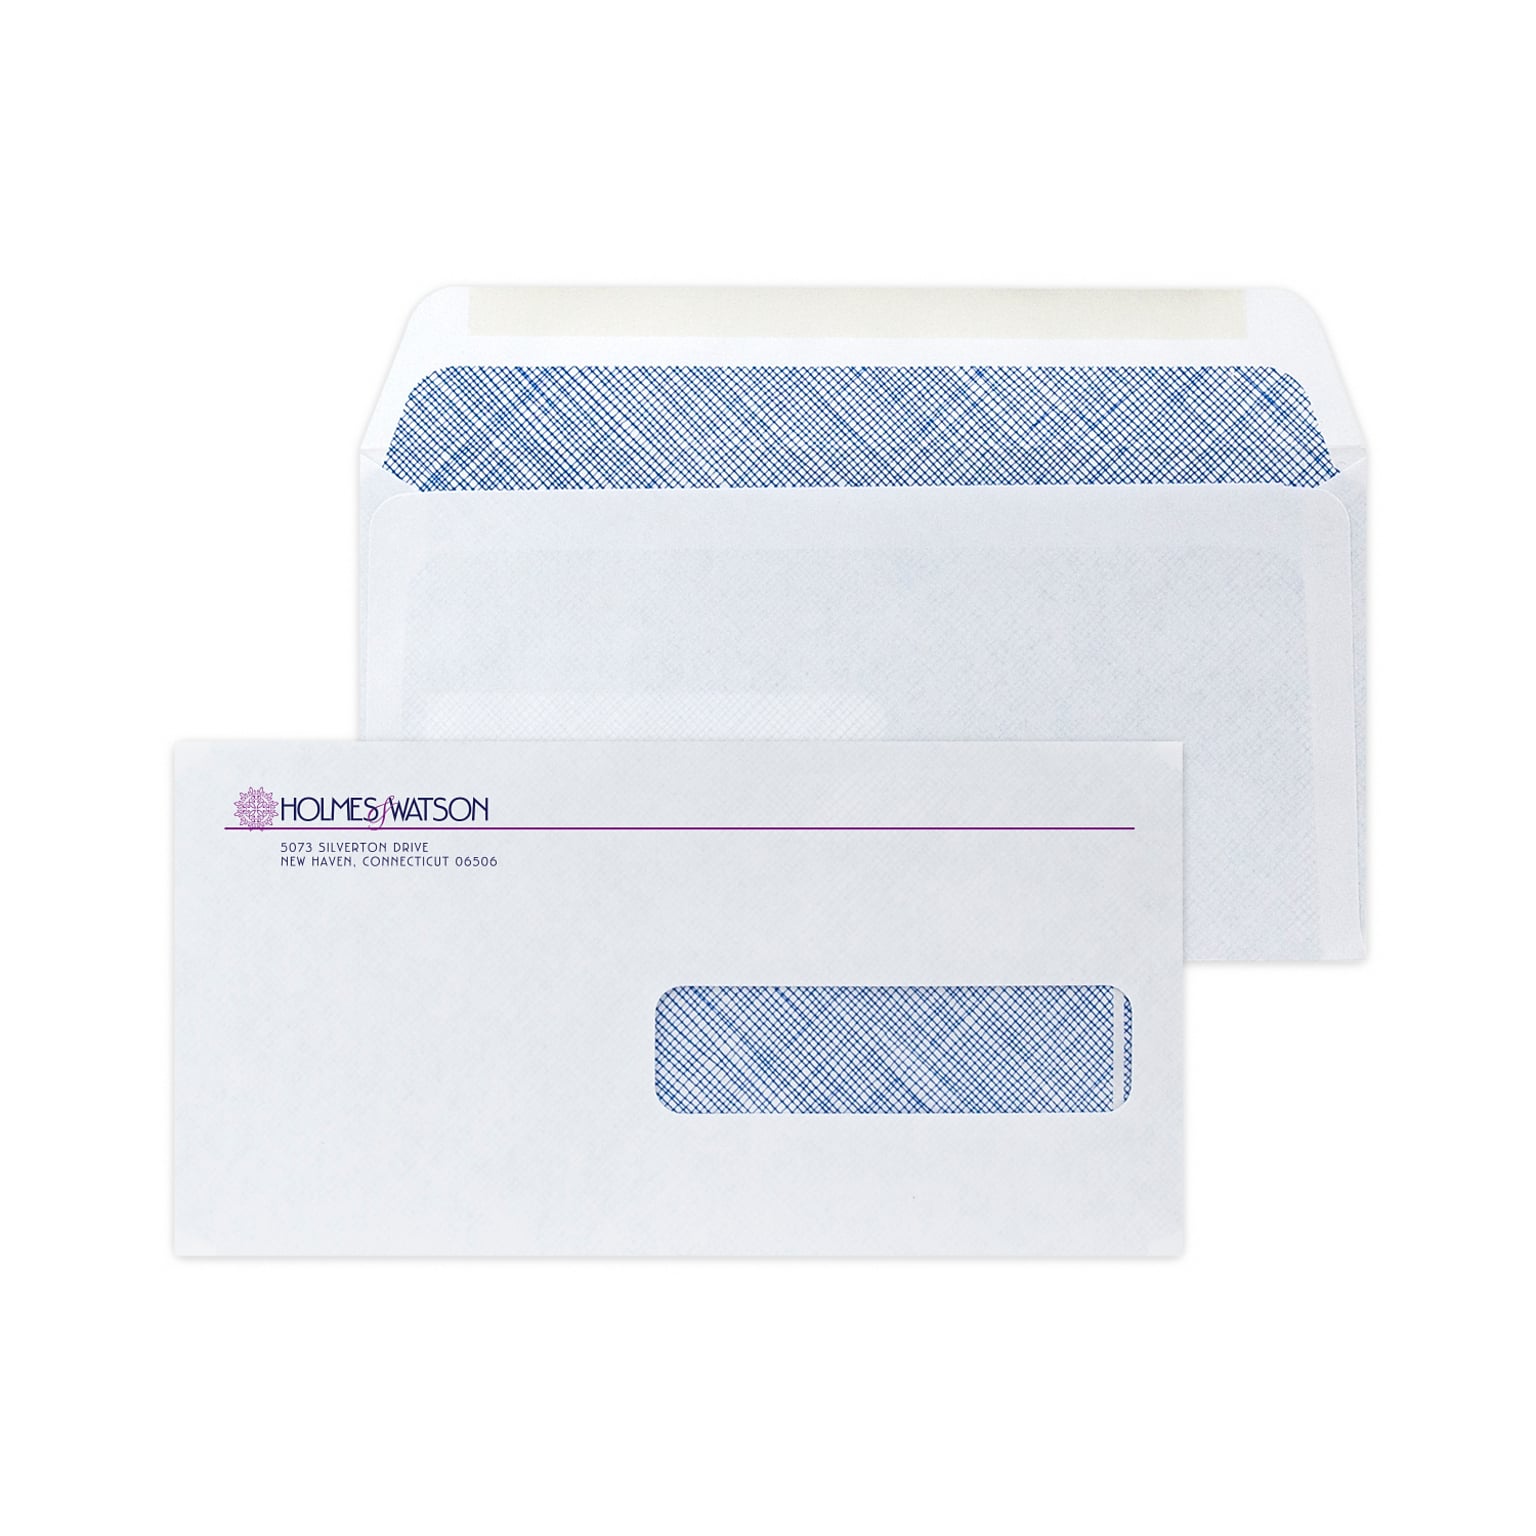 Custom 4-1/2 x 9 Insurance Claim Right Window Standard Envelopes with Security Tint, 24# White Wove, 2 Custom Inks, 250 / Pack